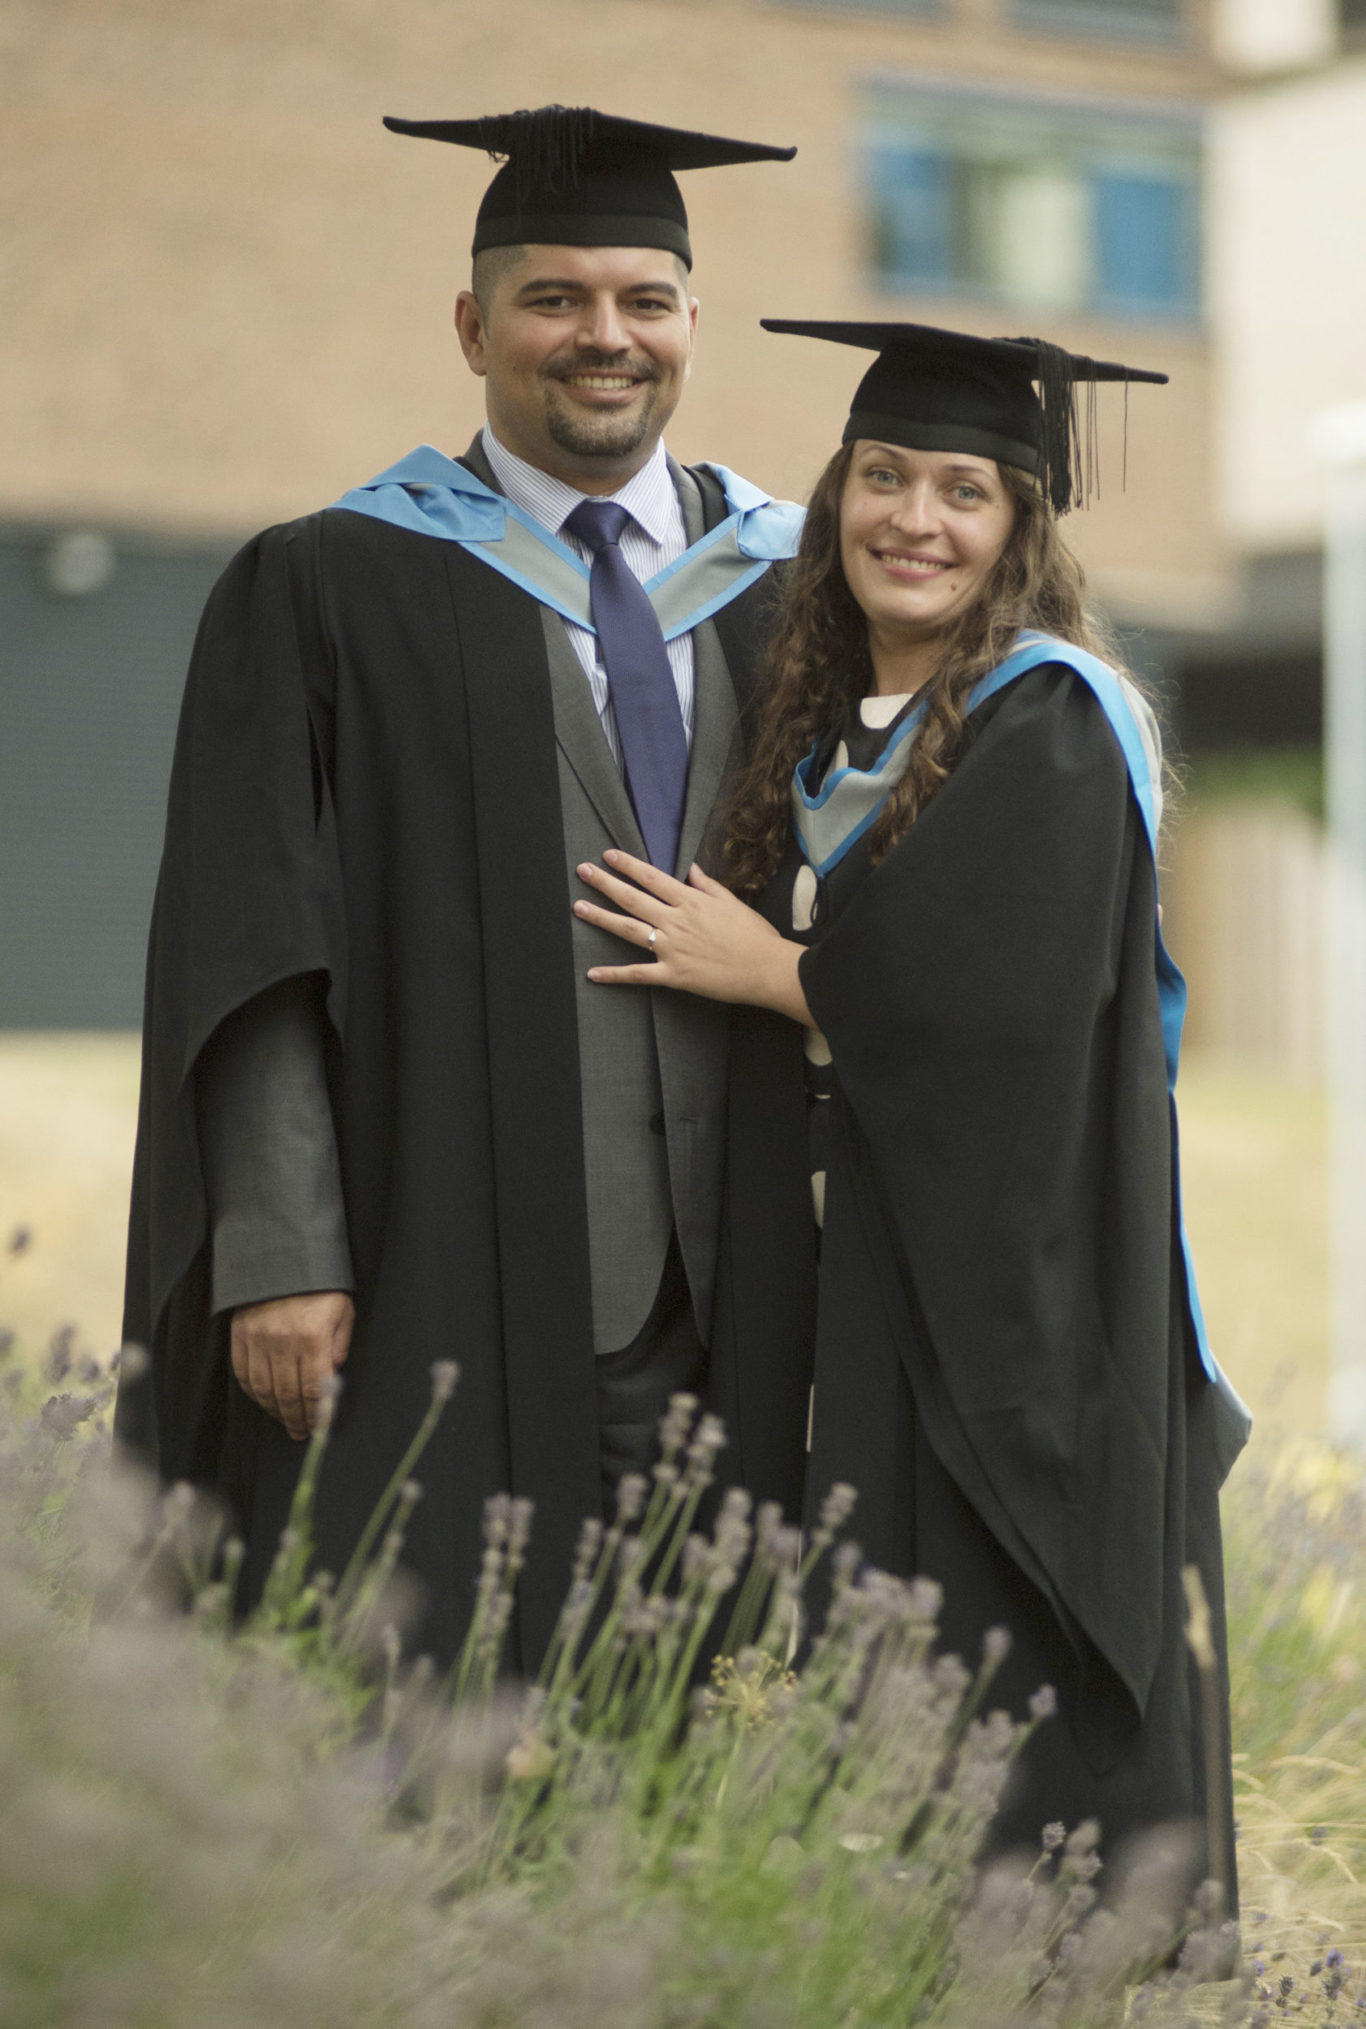 Alex and Nicoleta Tirb graduated from the University of Exeter Medical School on Tuesday afternoon after getting married in the morning (Exeter University/PA)